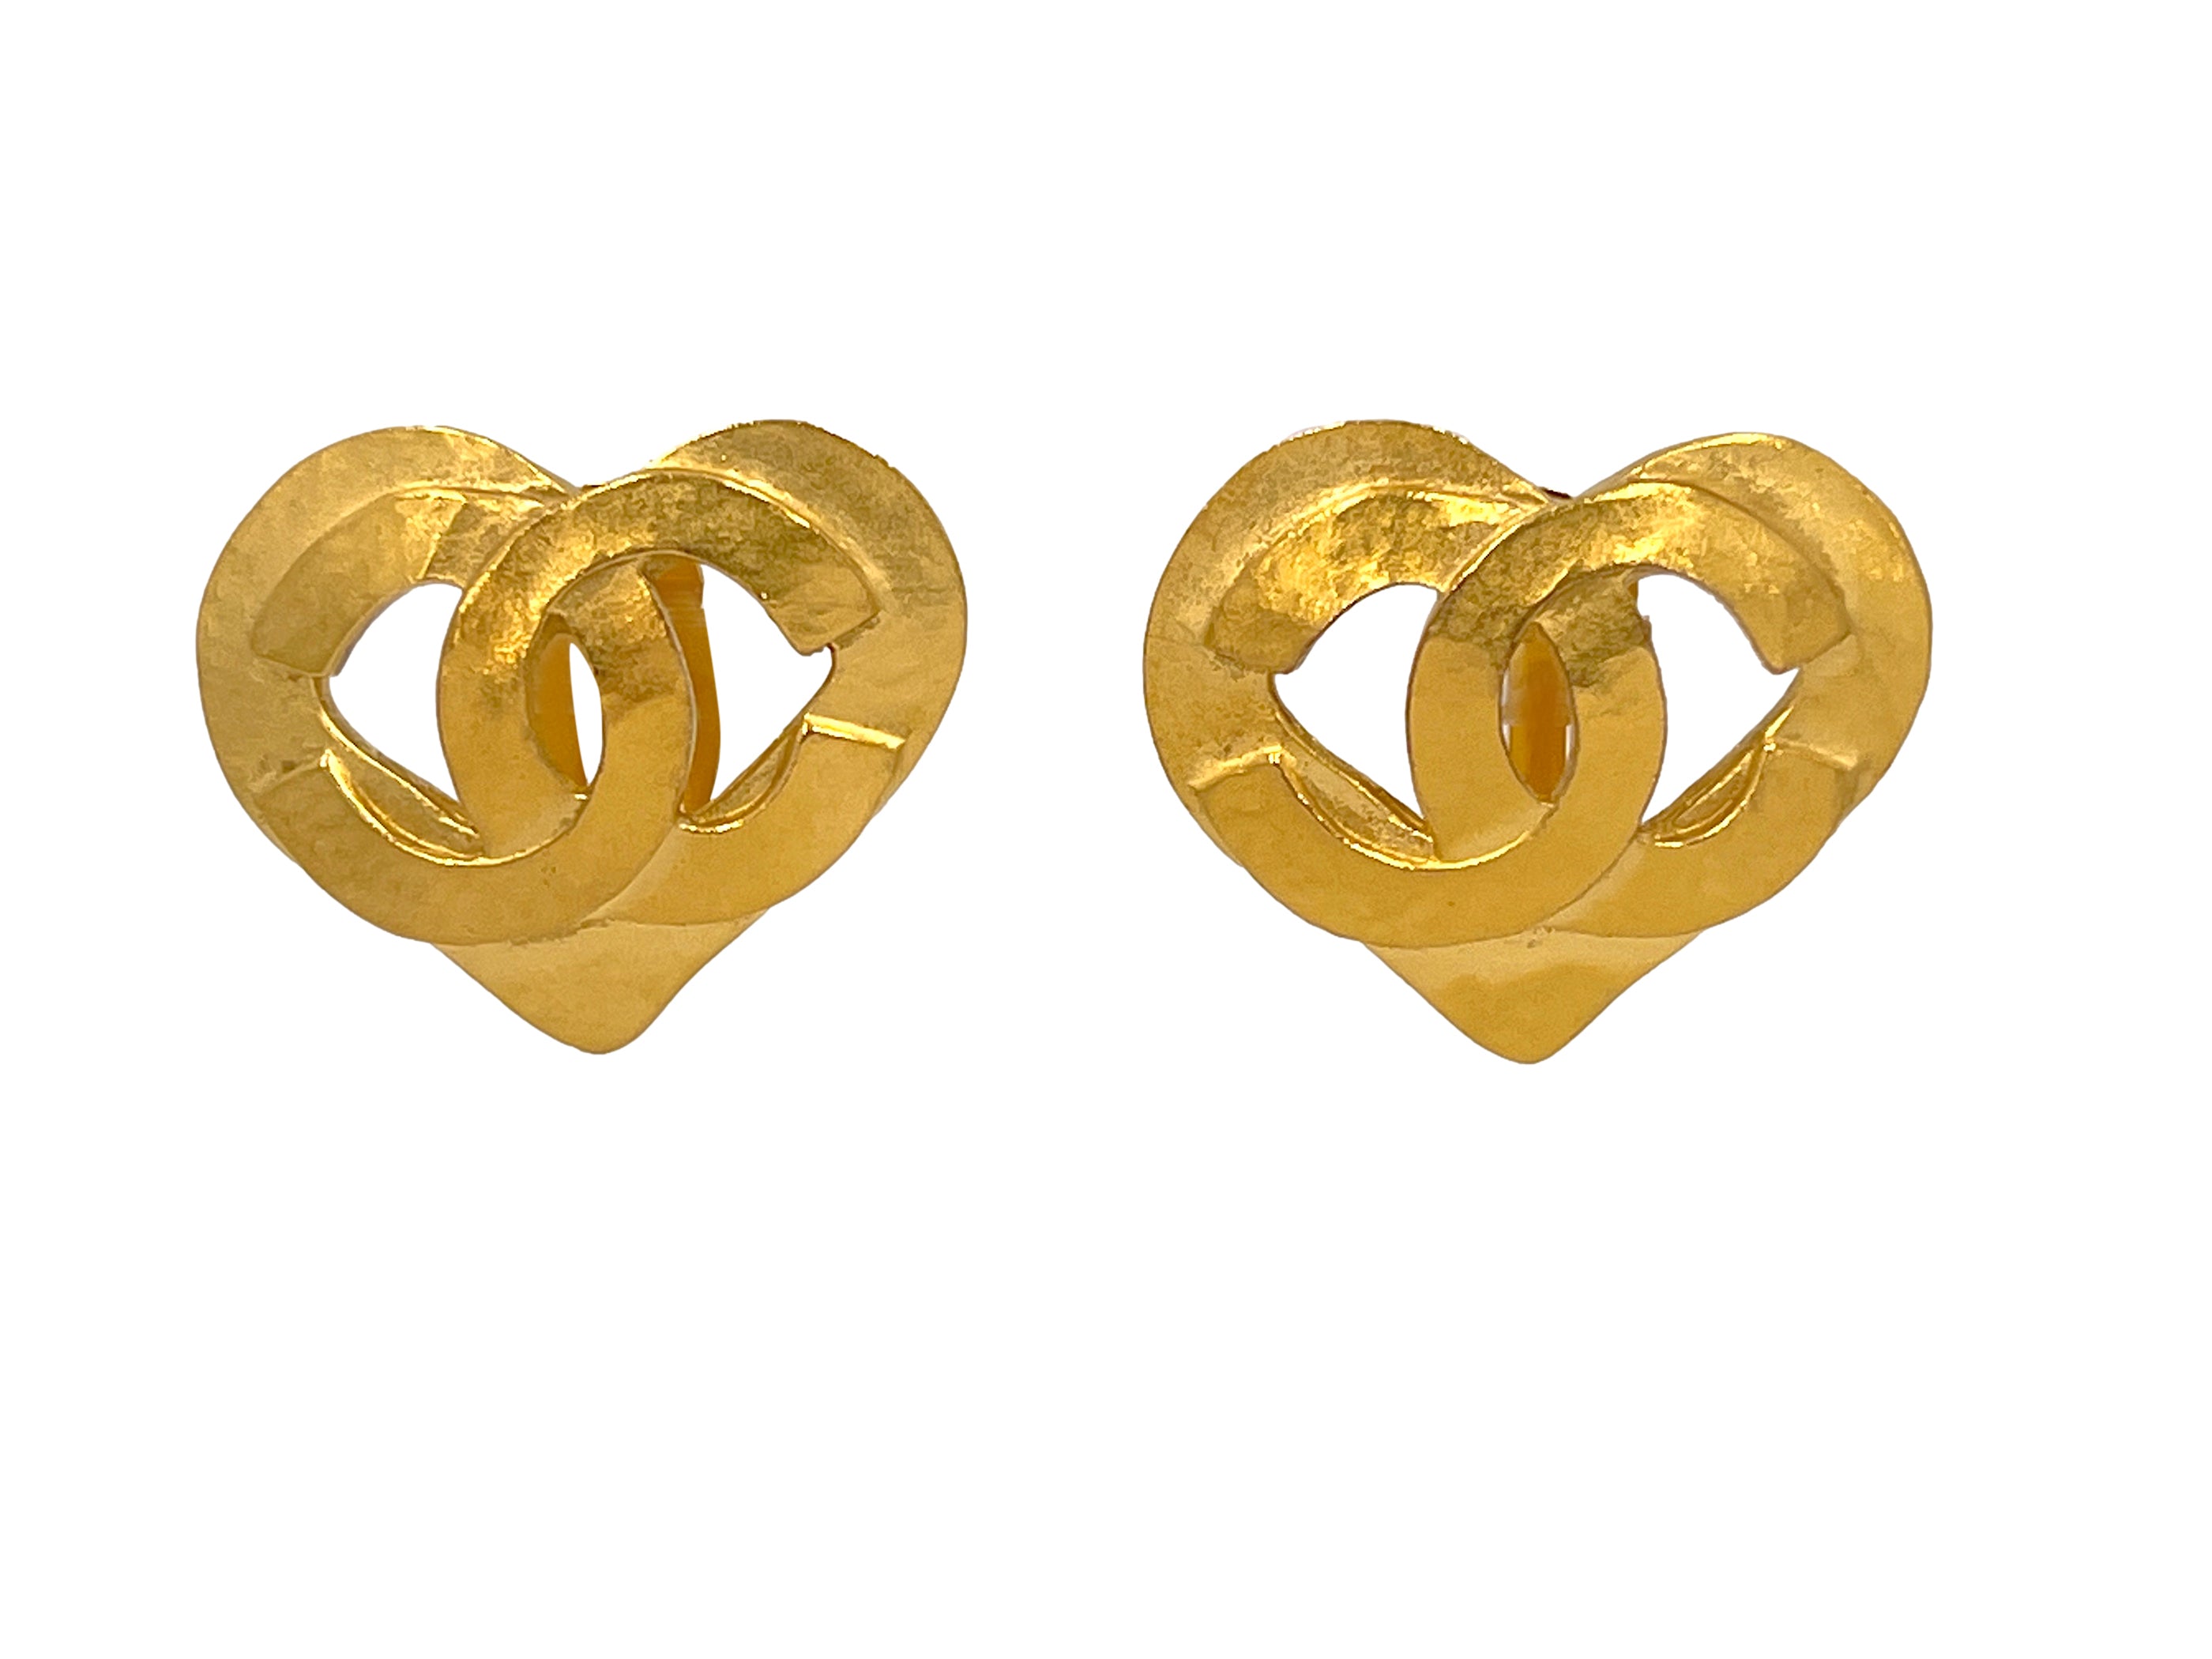 A Pair of Vintage Chanel 1993 Gold Toned Heart Clip On Earrings